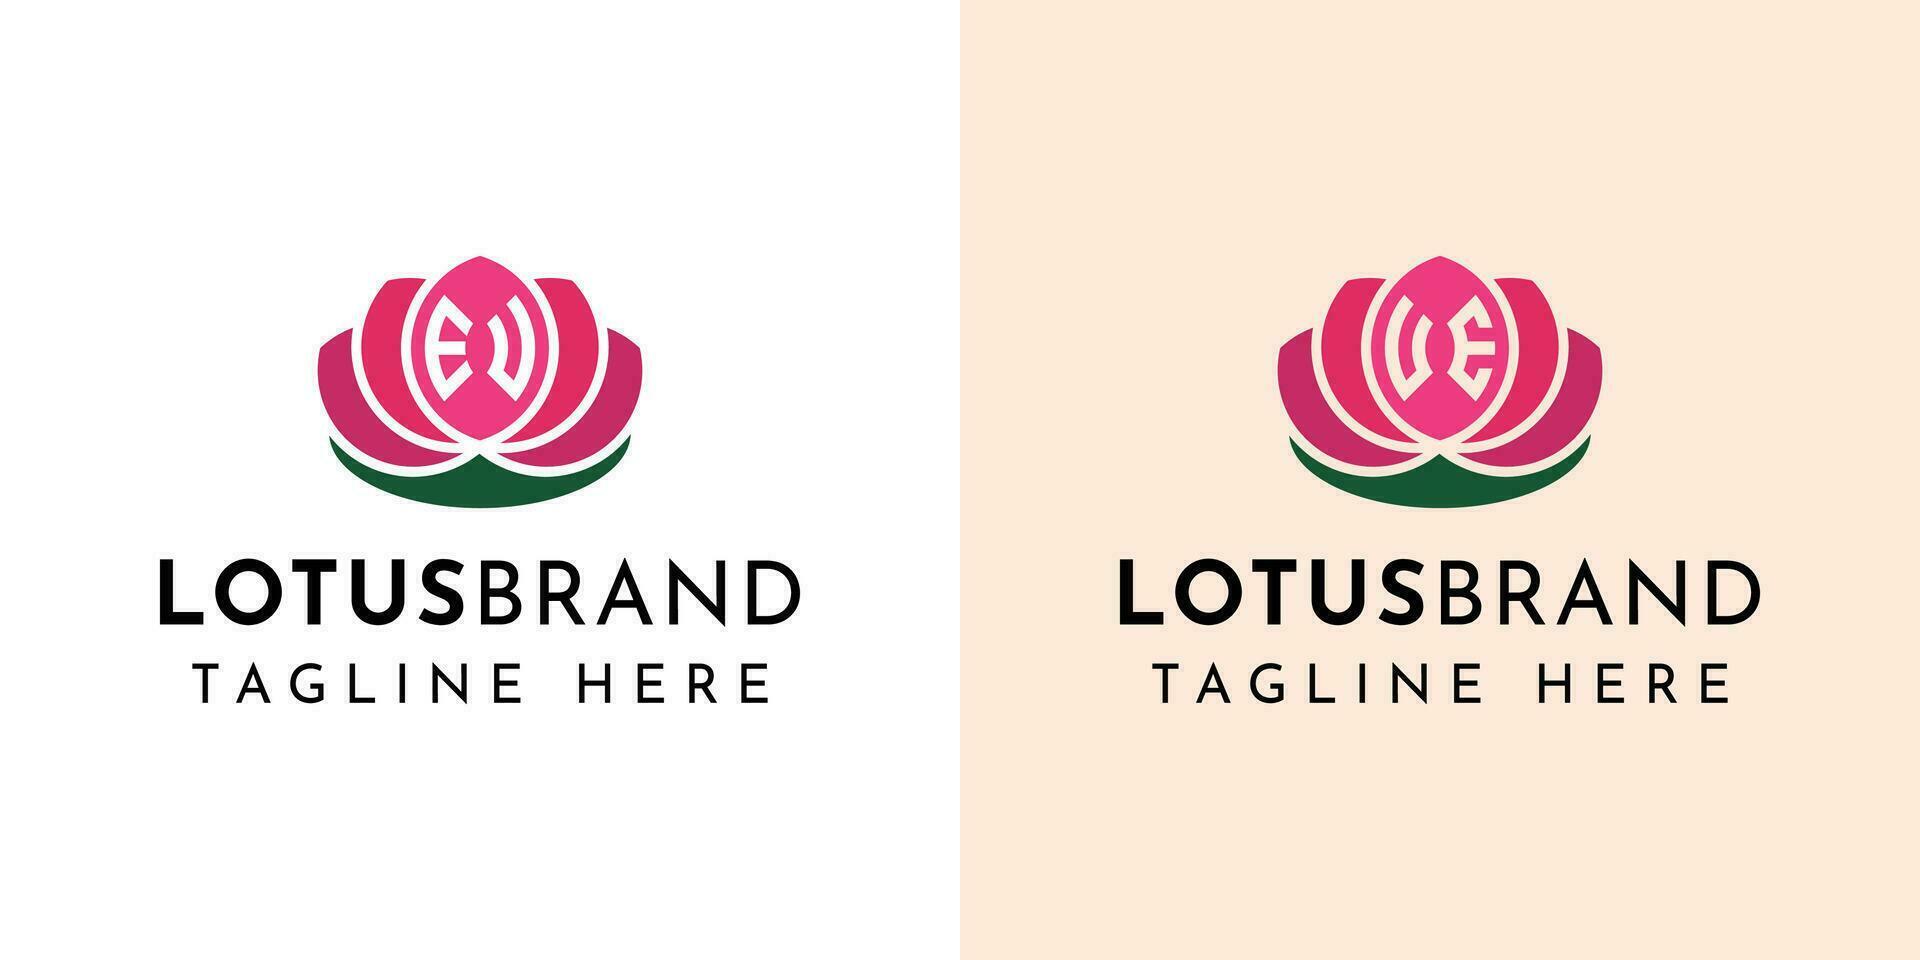 Letter EU and UE Lotus Logo Set, suitable for business related to lotus flowers with EU or UE initials. vector